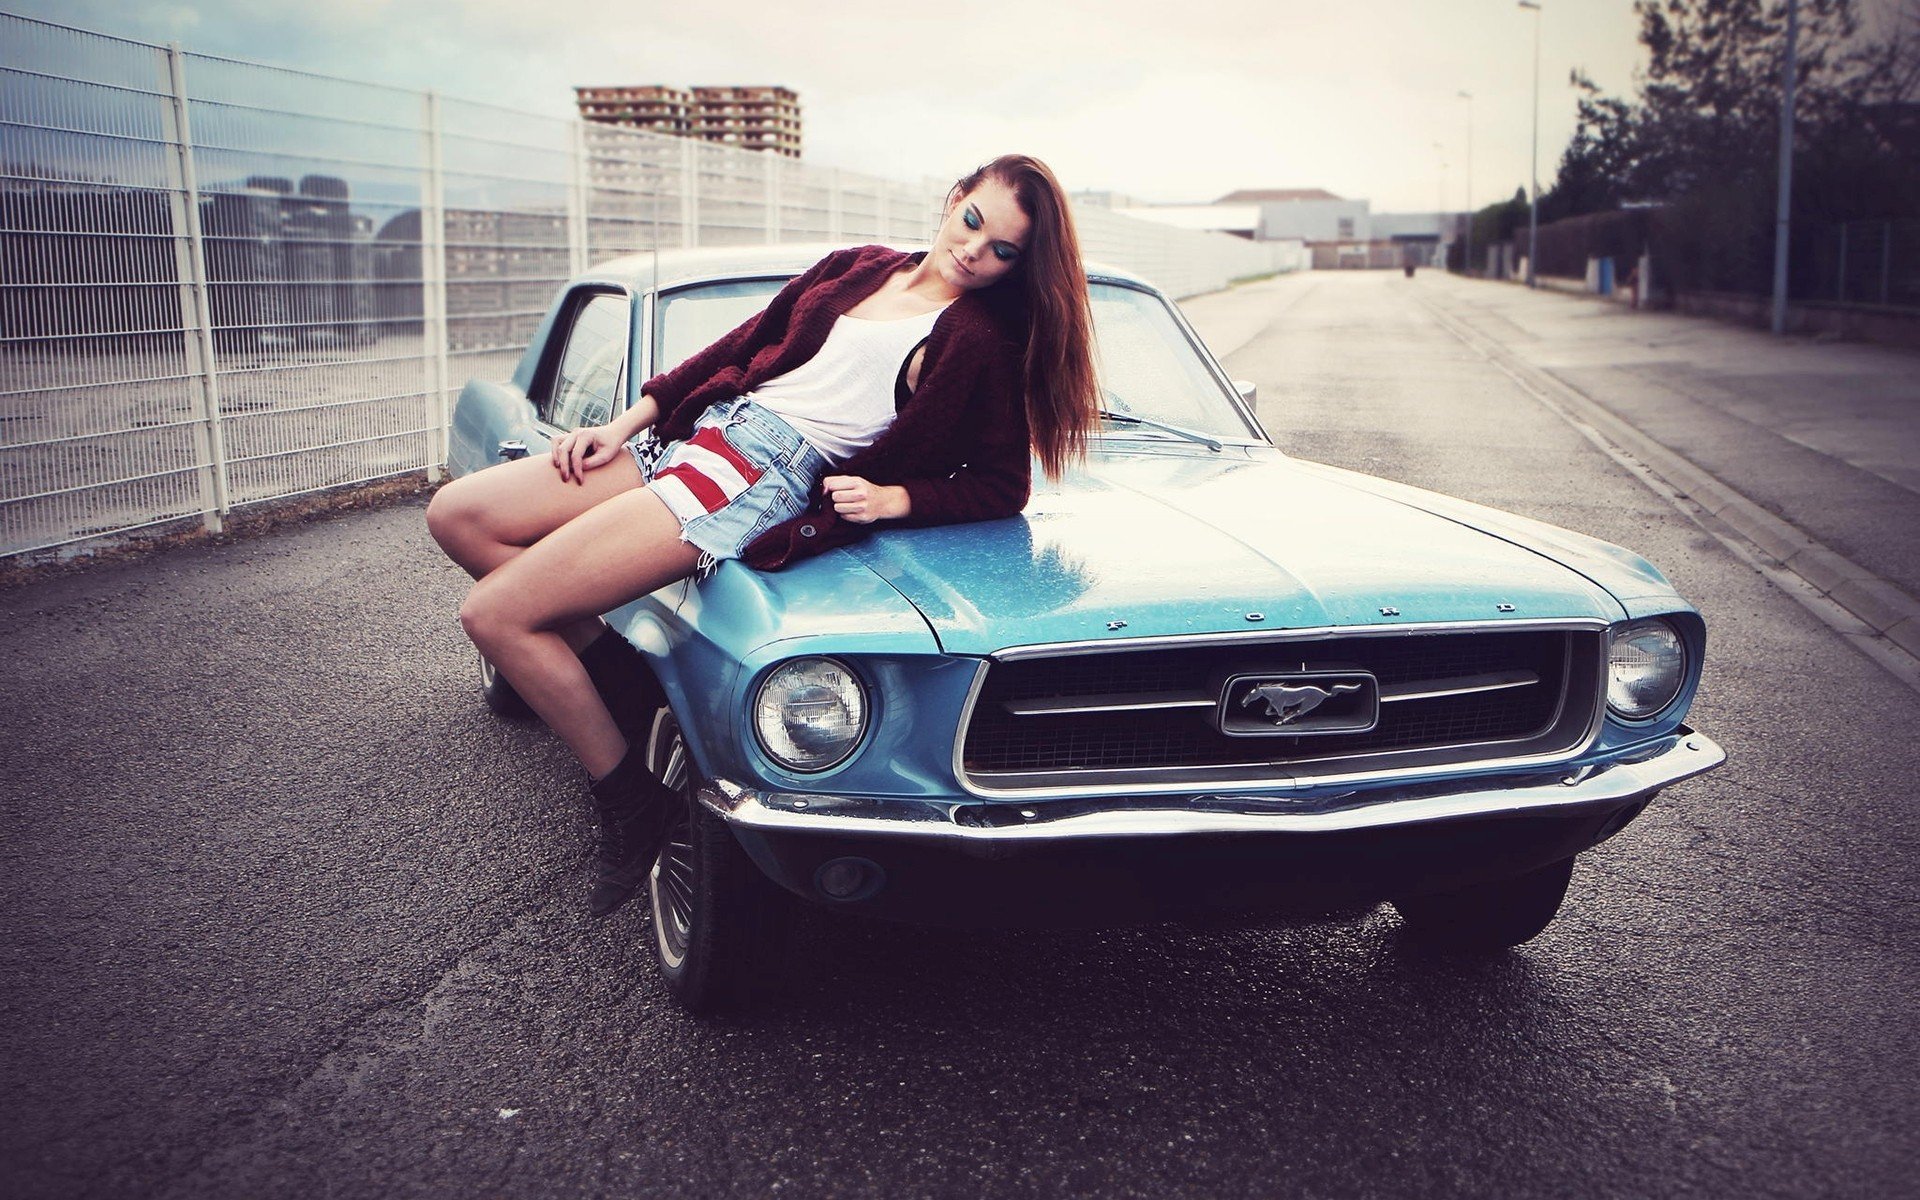 women, Ford, Car, Ford Mustang, Jean shorts, Shorts, Sweater, Open sweater, Tank top, Legs, Redhead, Smoky eyes, Painted nails, American flag, Road, Women with cars Wallpaper